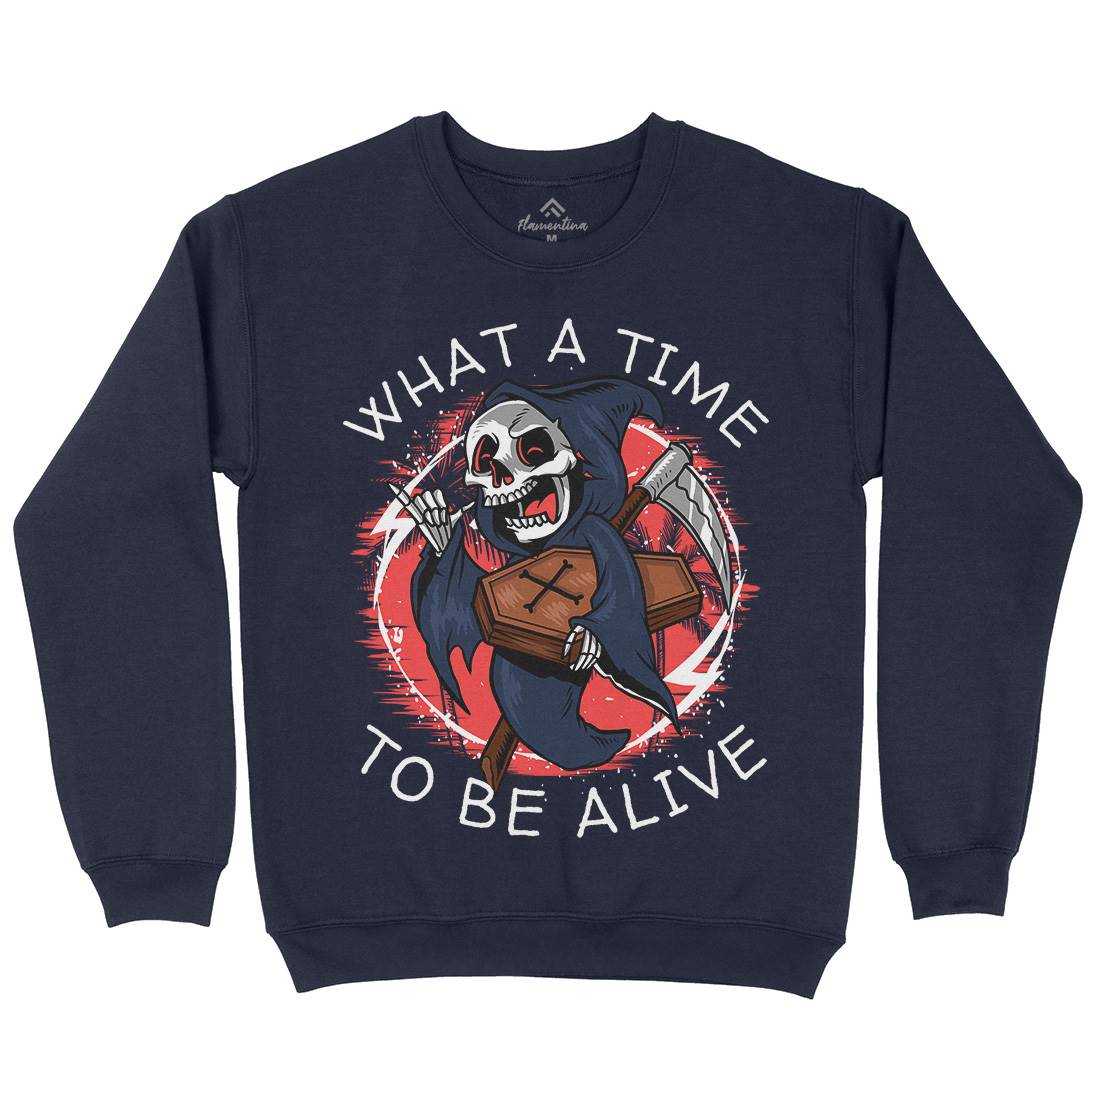 What A Time To Be Alive Kids Crew Neck Sweatshirt Funny D096